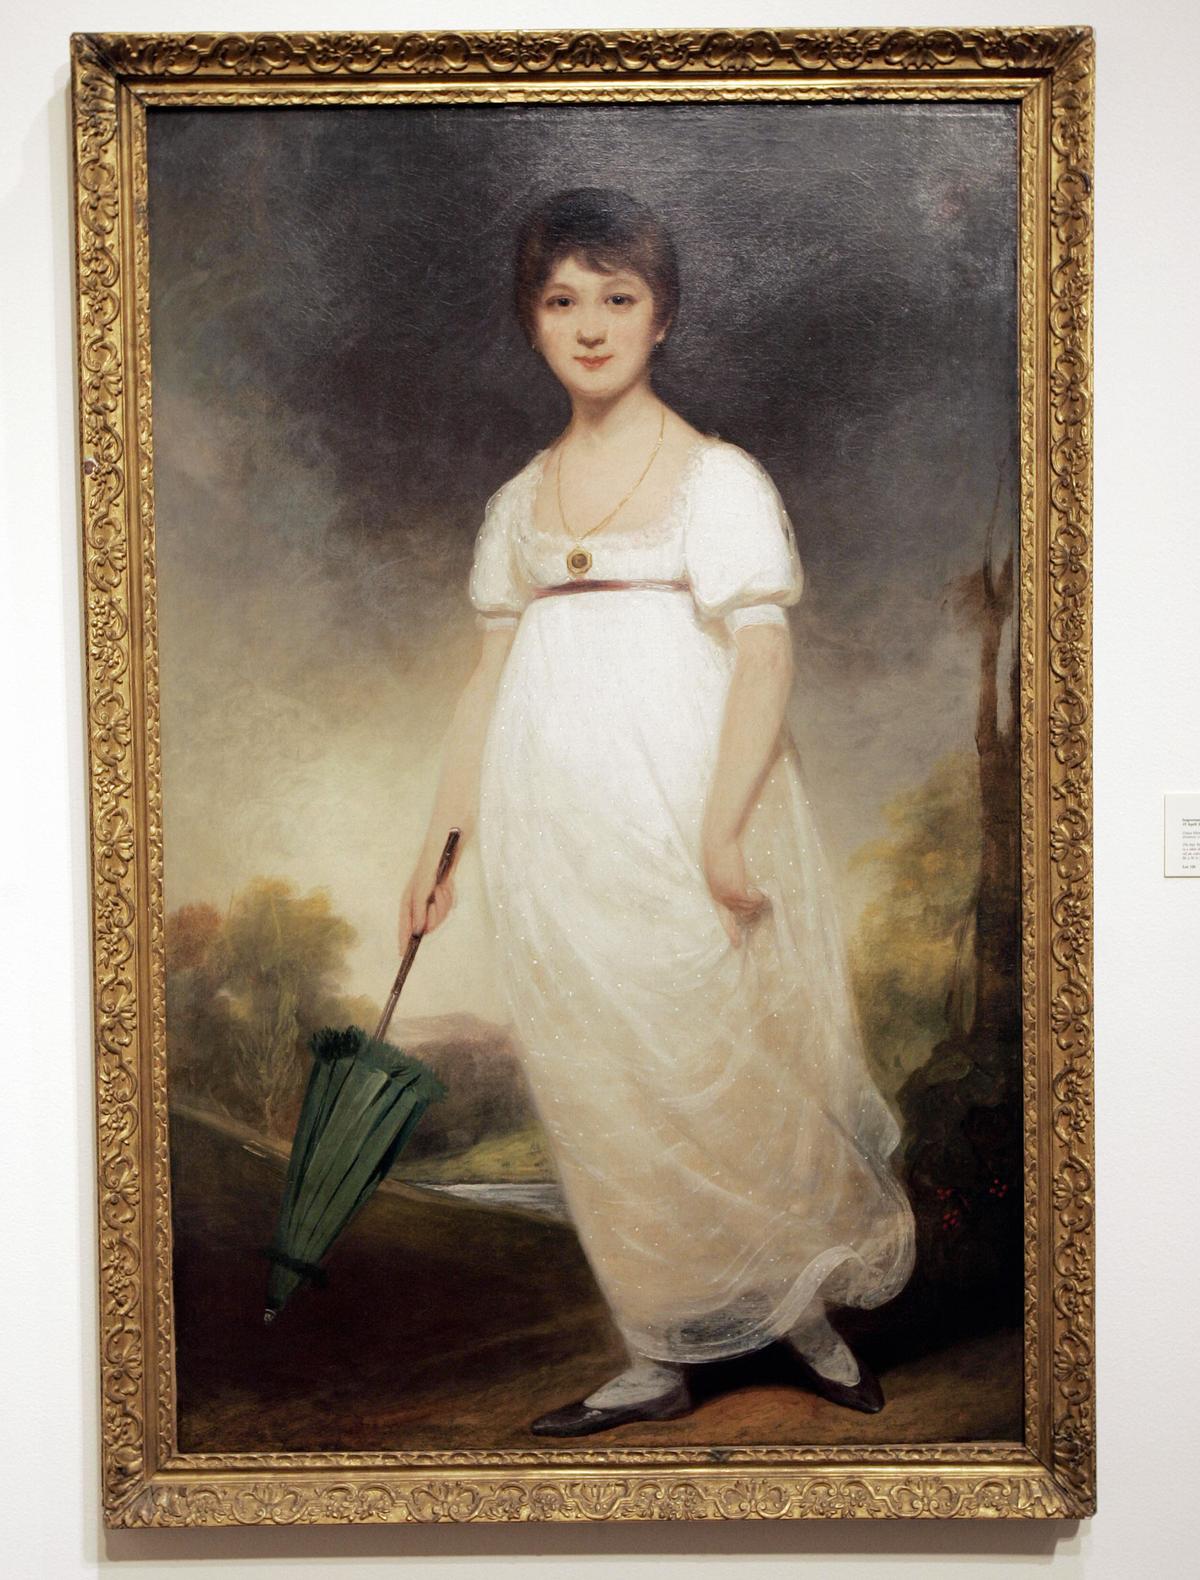 A portrait of Jane Austen by British painter Ozias Humphry (1742–1810) on display at Christie's auction house in New York on April 16, 2007. (STAN HONDA/AFP via Getty Images)